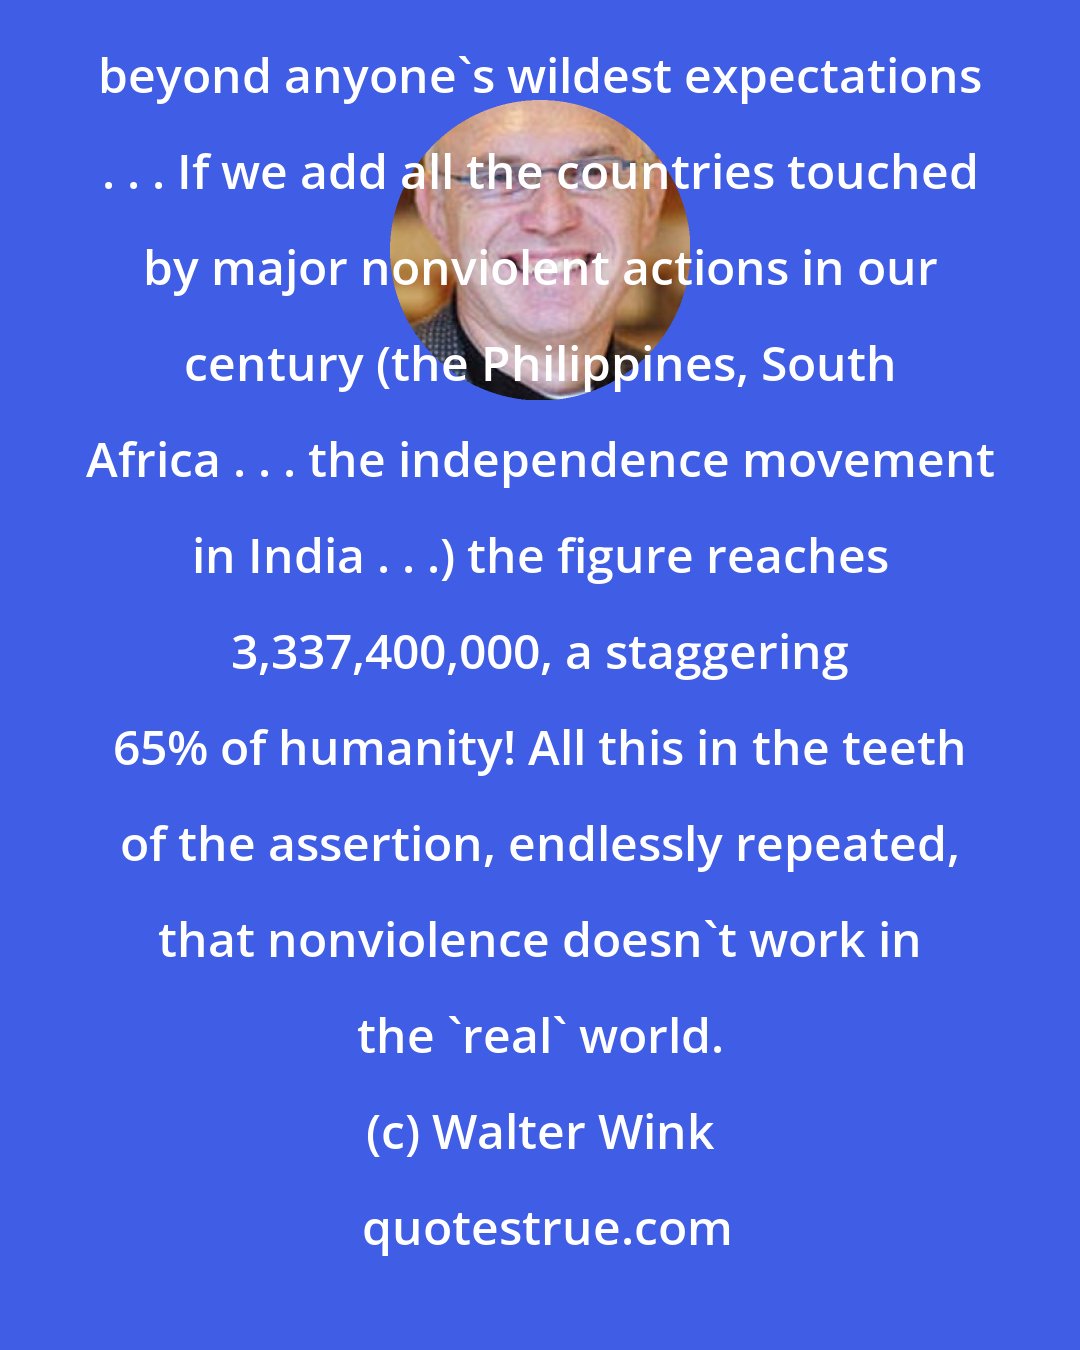 Walter Wink: In 1989, thirteen nations comprising 1,695,000 people experienced nonviolent revolutions that succeeded beyond anyone's wildest expectations . . . If we add all the countries touched by major nonviolent actions in our century (the Philippines, South Africa . . . the independence movement in India . . .) the figure reaches 3,337,400,000, a staggering 65% of humanity! All this in the teeth of the assertion, endlessly repeated, that nonviolence doesn't work in the 'real' world.